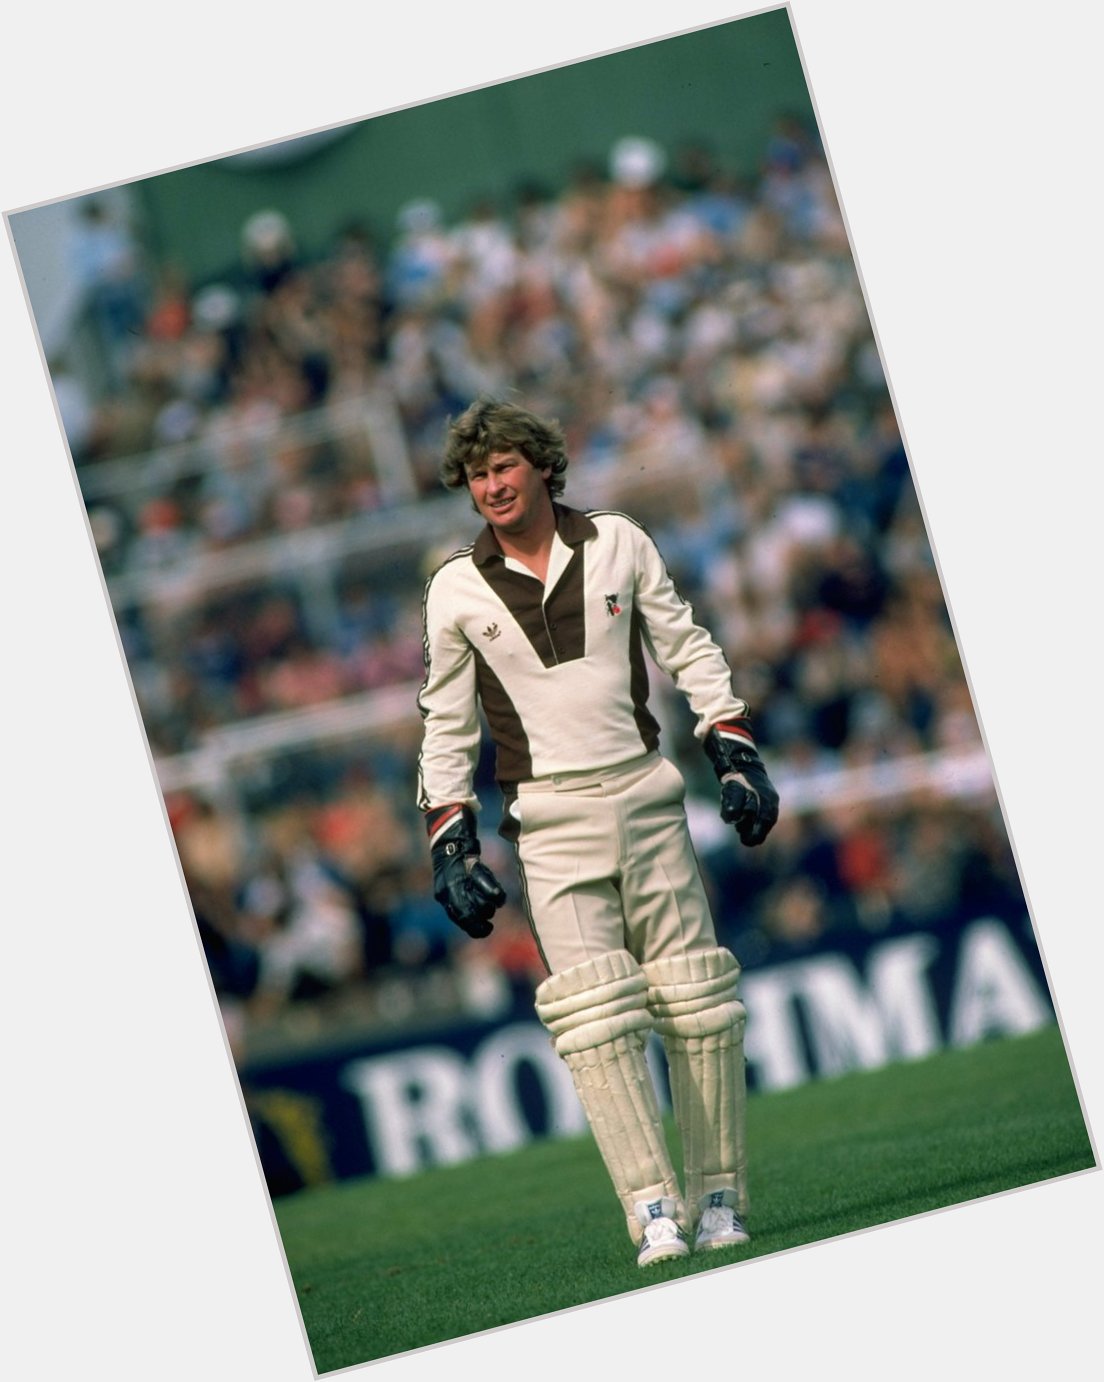 He took 176 dismissals in Tests and 86 in ODIs as wicketkeeper for New Zealand - Happy 60th Birthday to Ian Smith! 